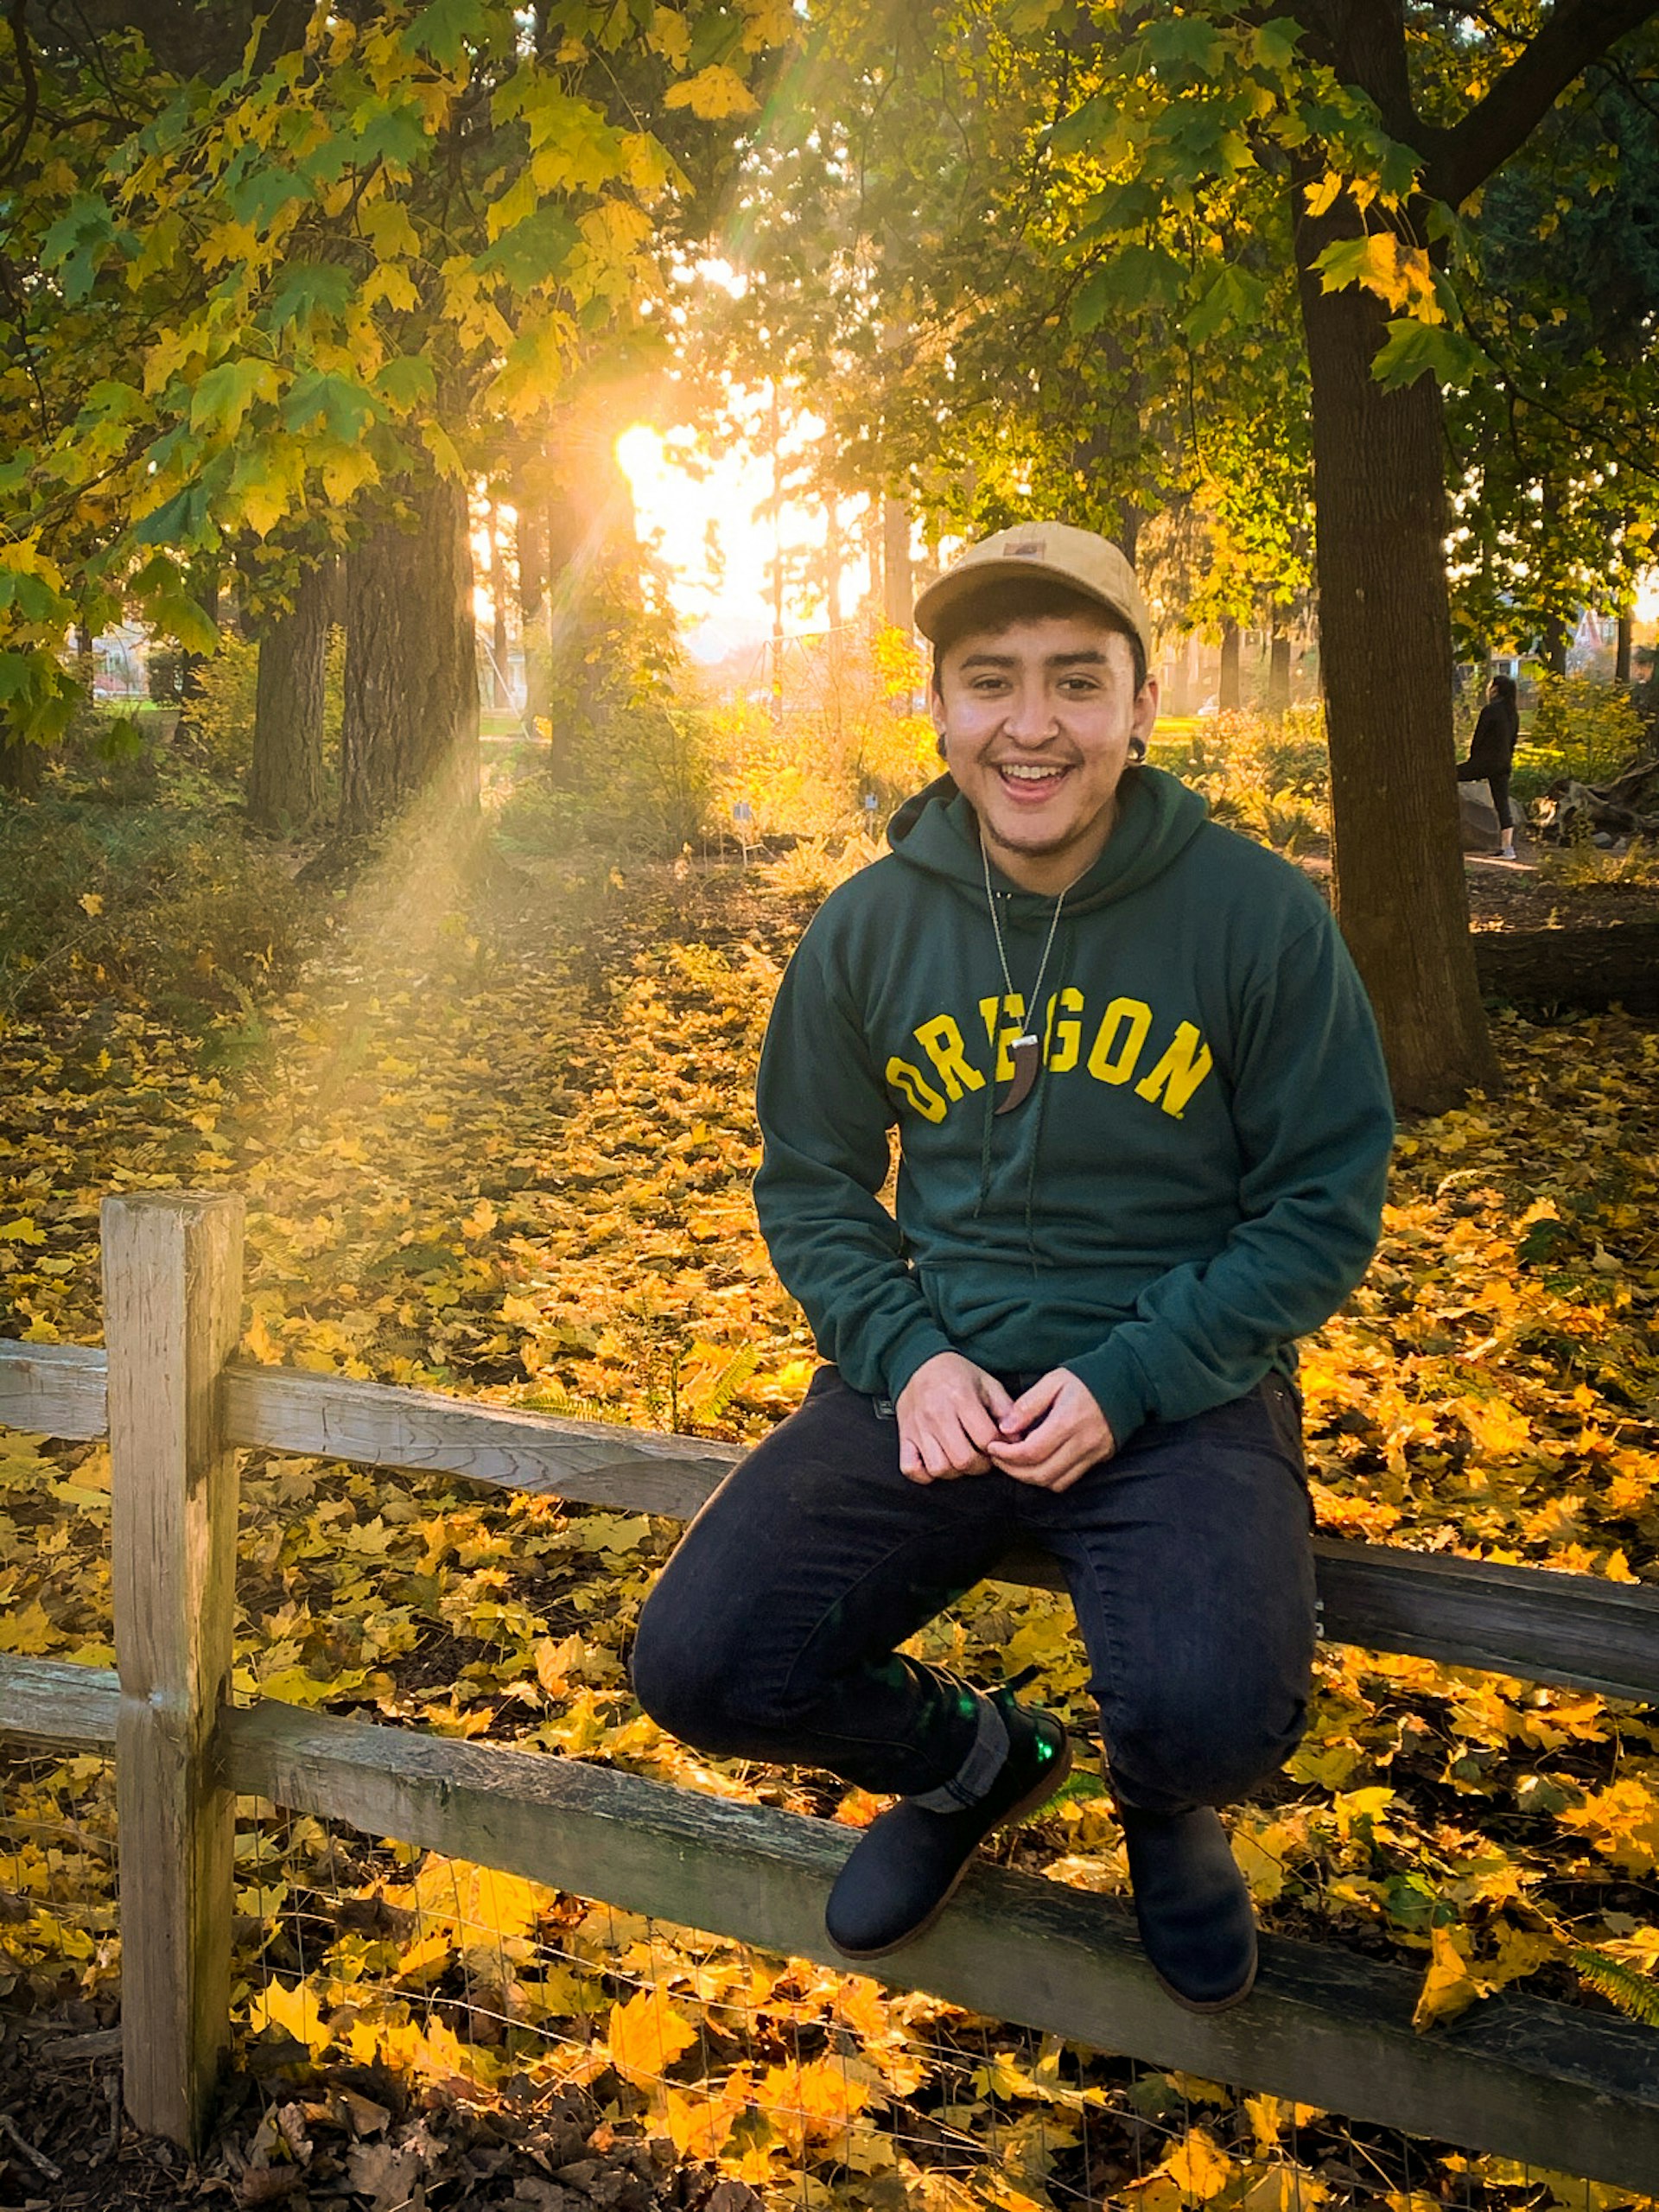 A person sits on a wooden fence smiling at the camera. They are in woodland, with golden sunlight shining through the trees